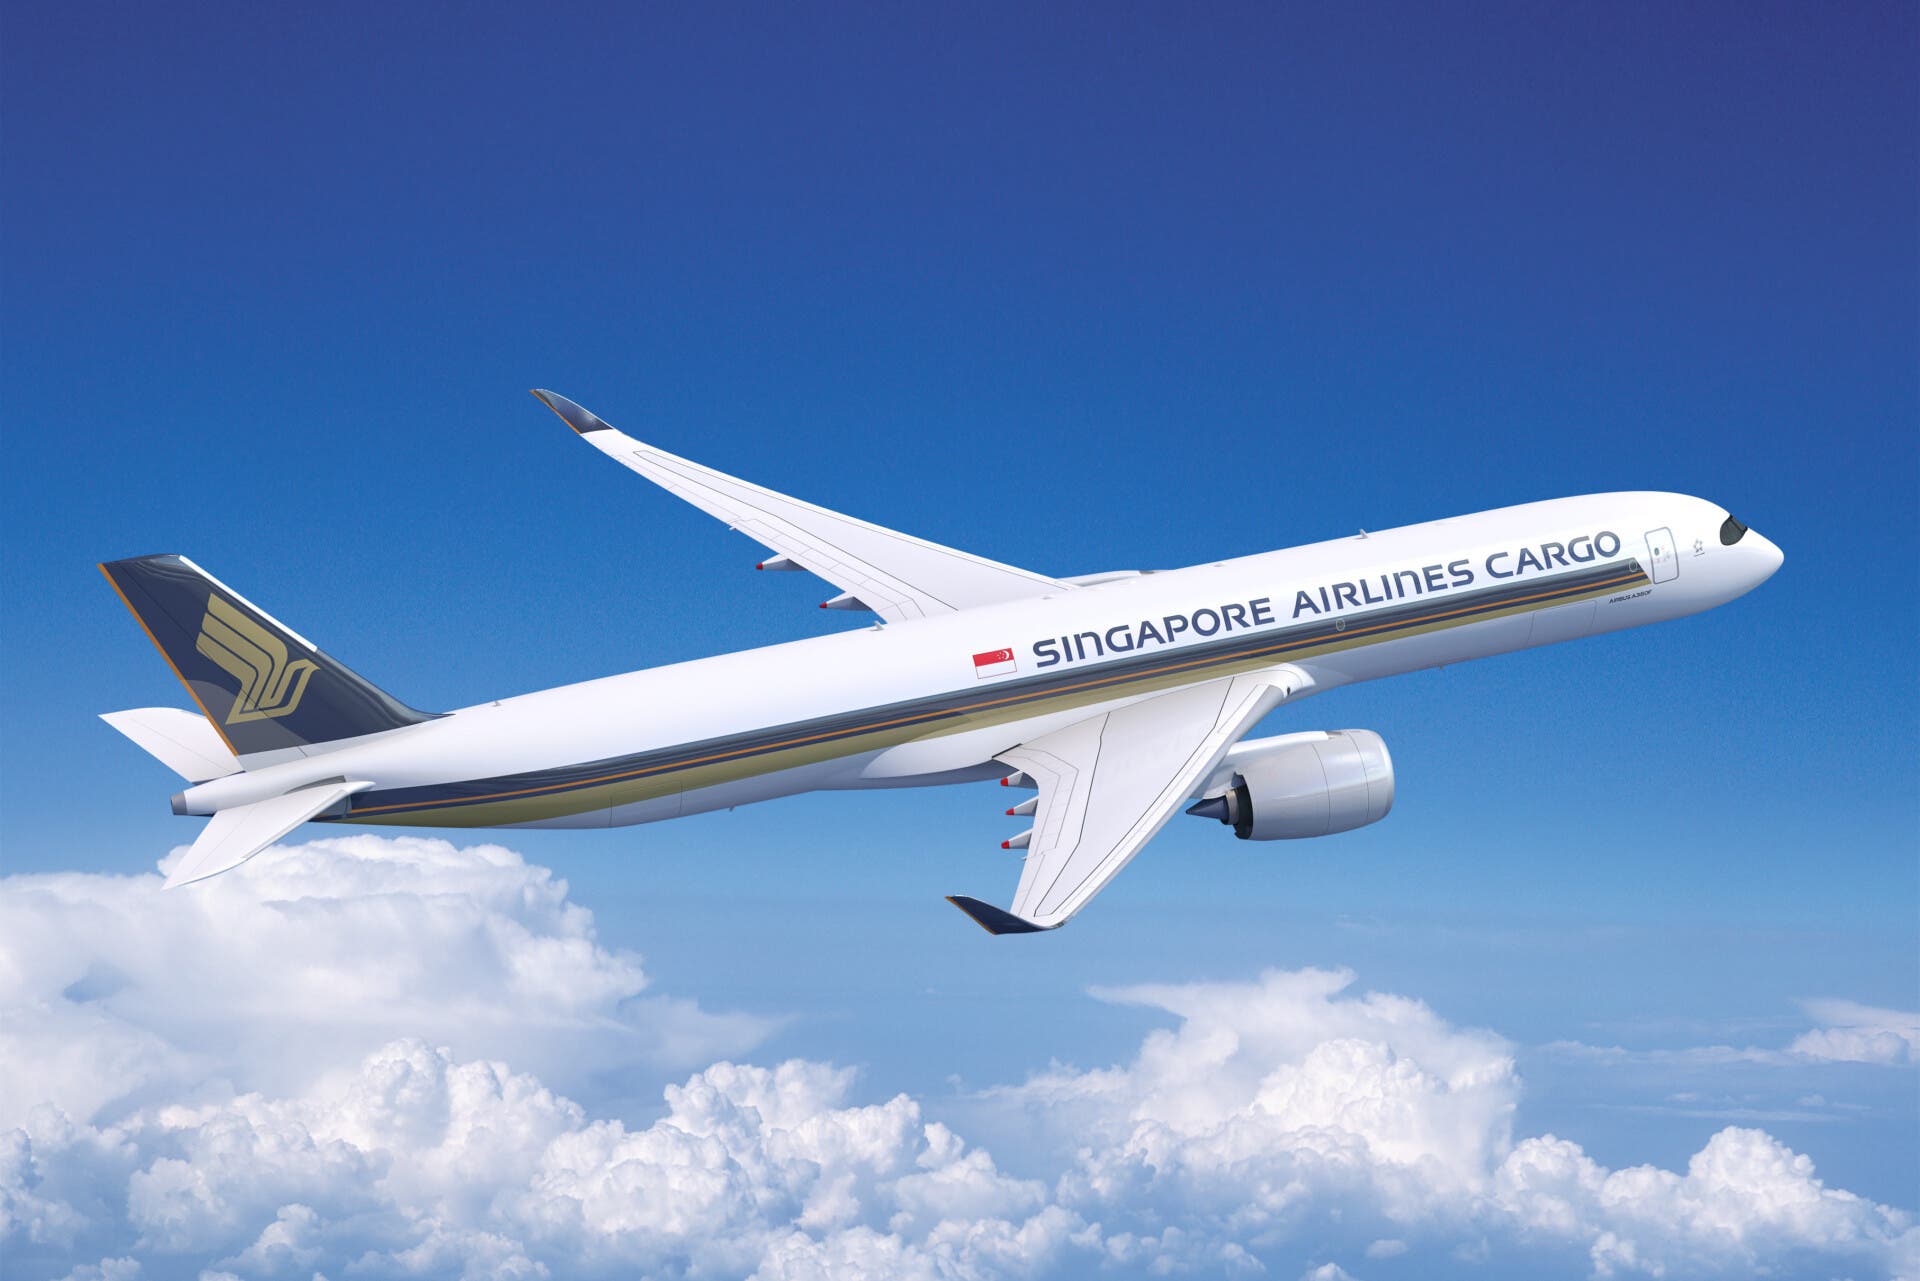 Singapore Airlines to Acquire At Least Seven Airbus A350 Freighters